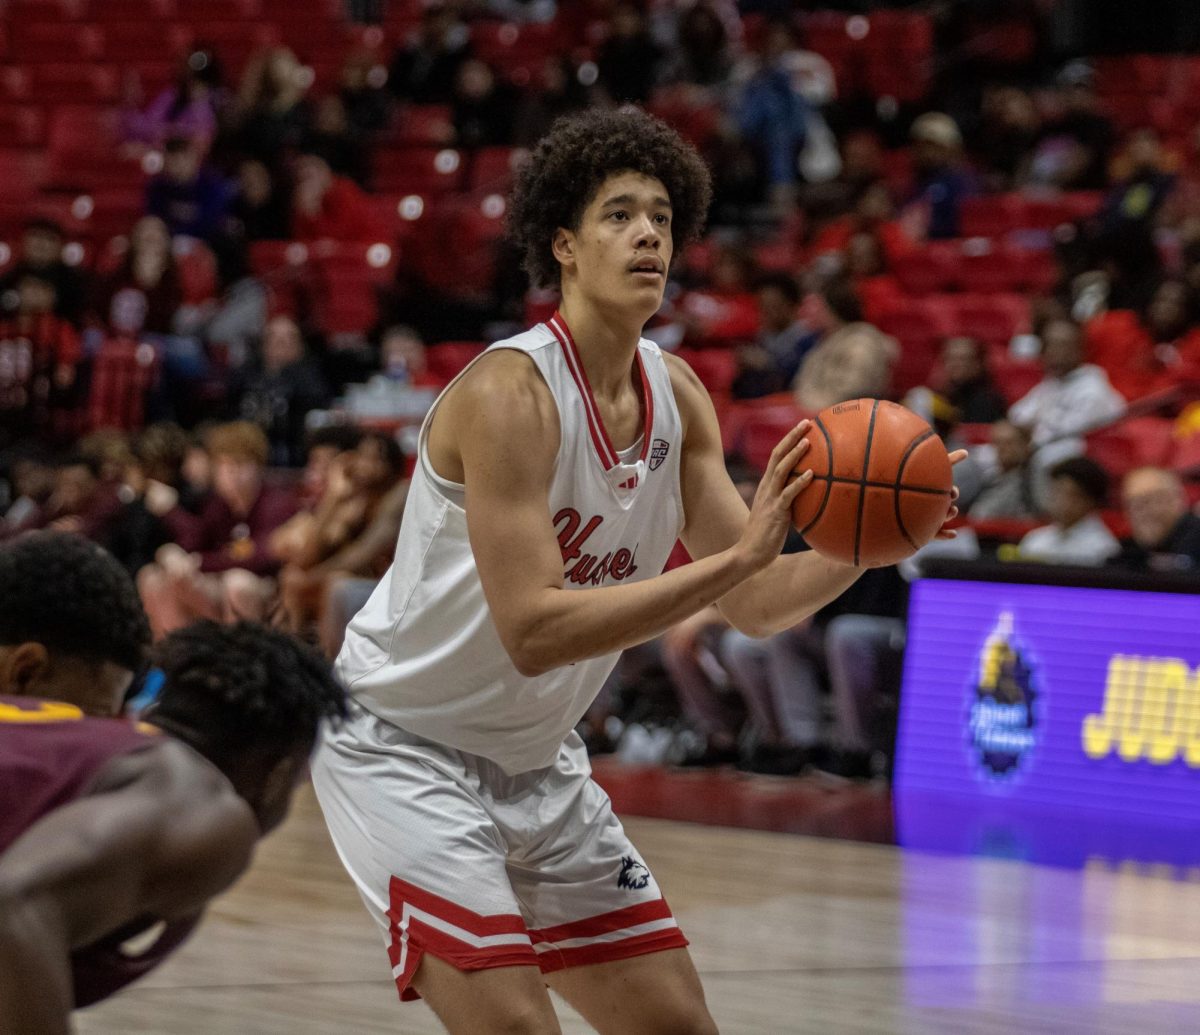 Sophomore+forward+Yanic+Konan+Niederhauser+prepares+to+shoot+a+free+throw+in+an+NIU+mens+basketball+home+game+against+Central+Michigan+University+on+March+5.+Konan+Niederhauser+announced+his+commitment+to+The+Pennsylvania+State+University+on+Monday+via+Instagram.+%28Tim+Dodge+%7C+Northern+Star%29